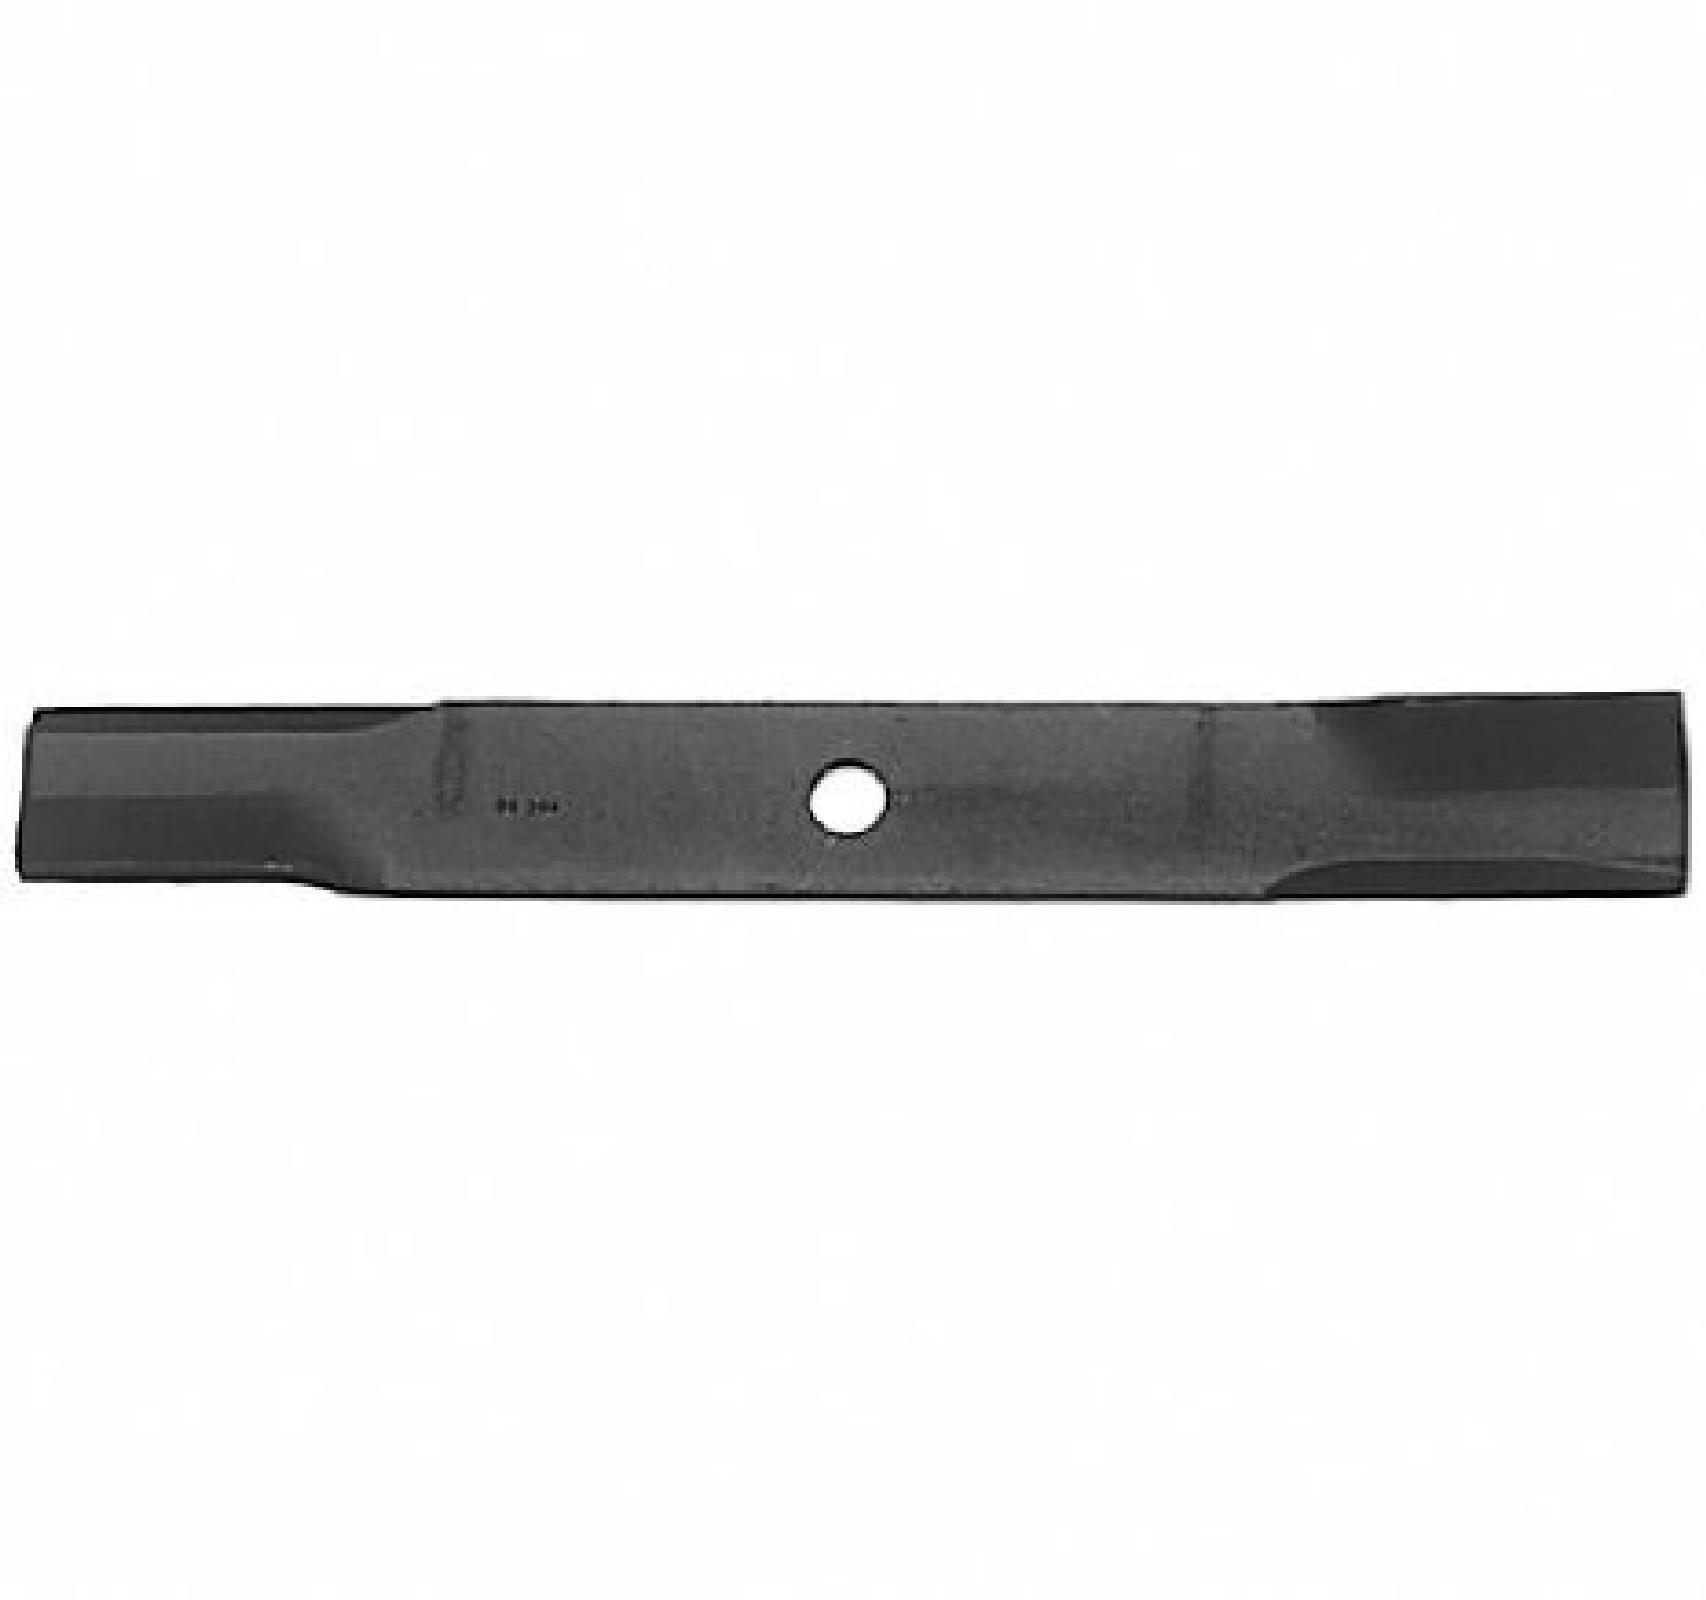 BLADE, CUB CADET 17 7/8IN part# 92-015 by Oregon - Click Image to Close